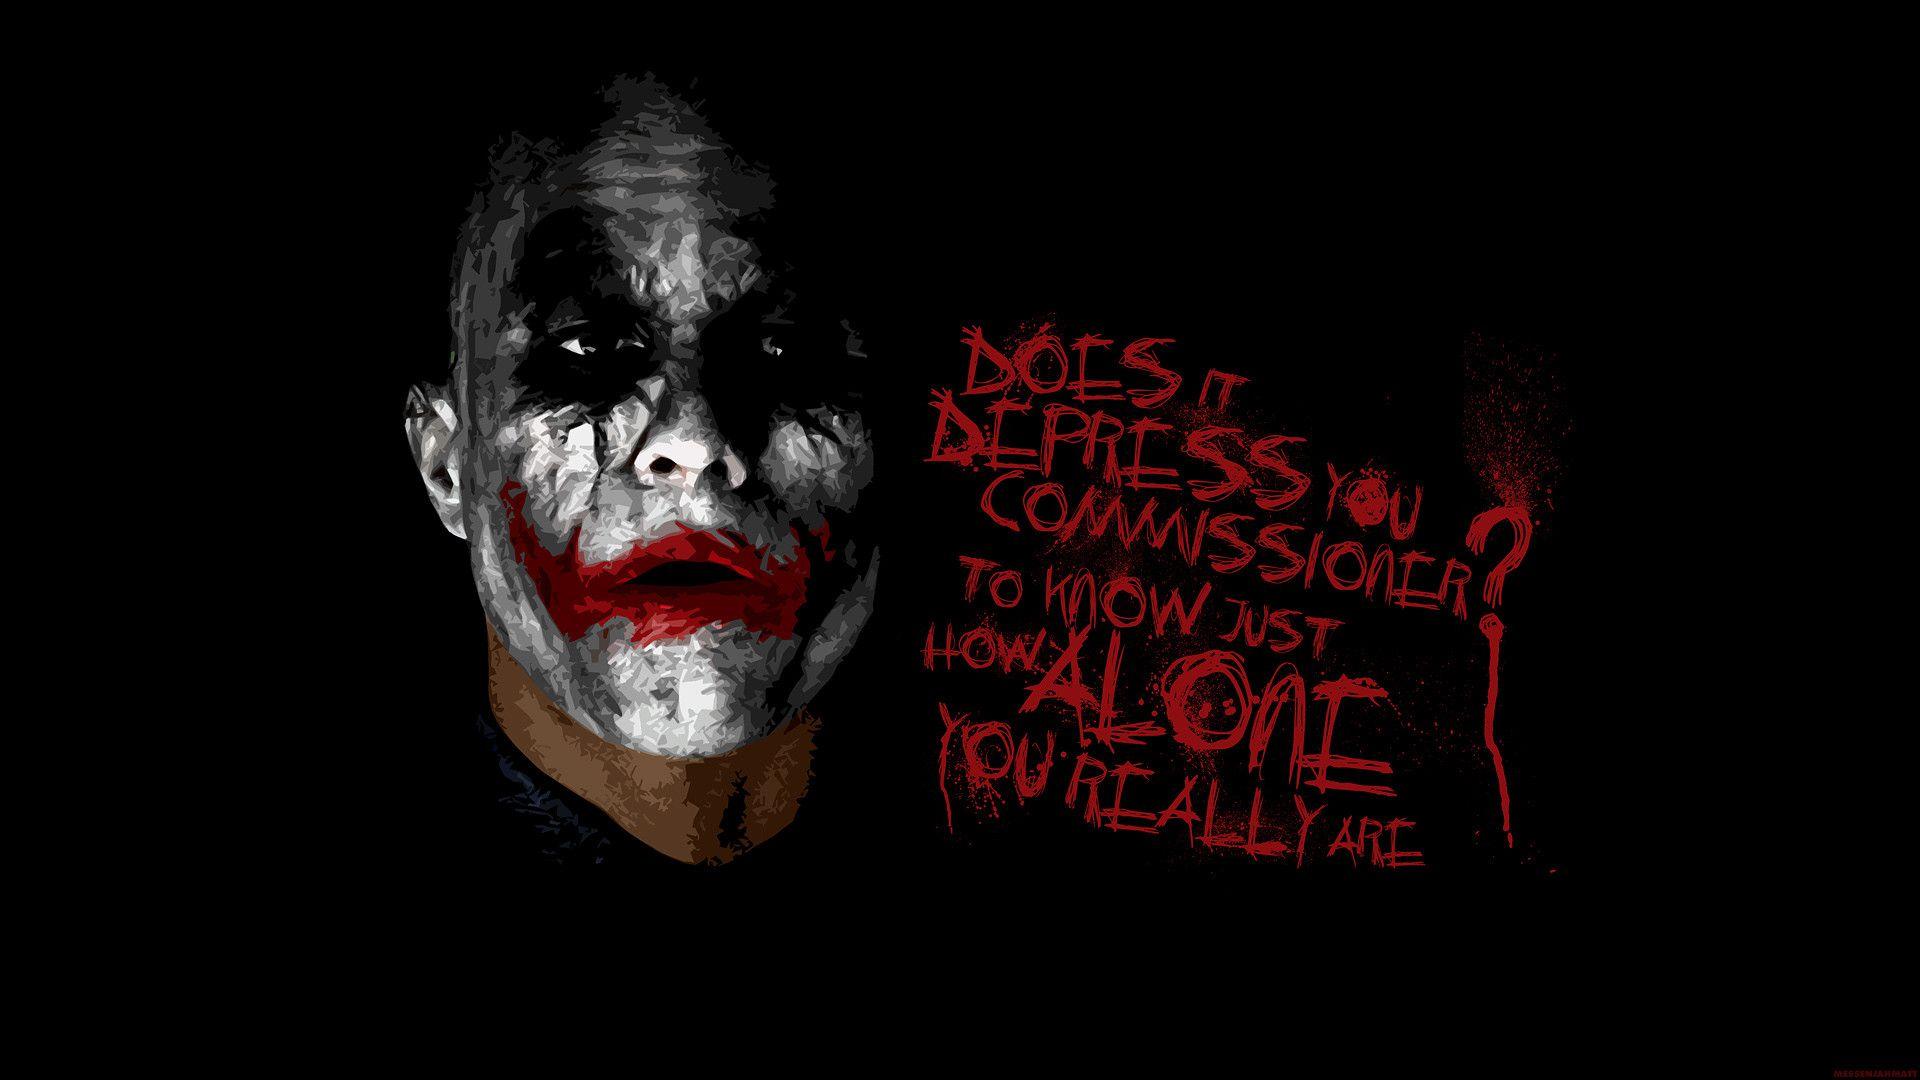 The Joker Quotes Wallpapers - Wallpaper Cave